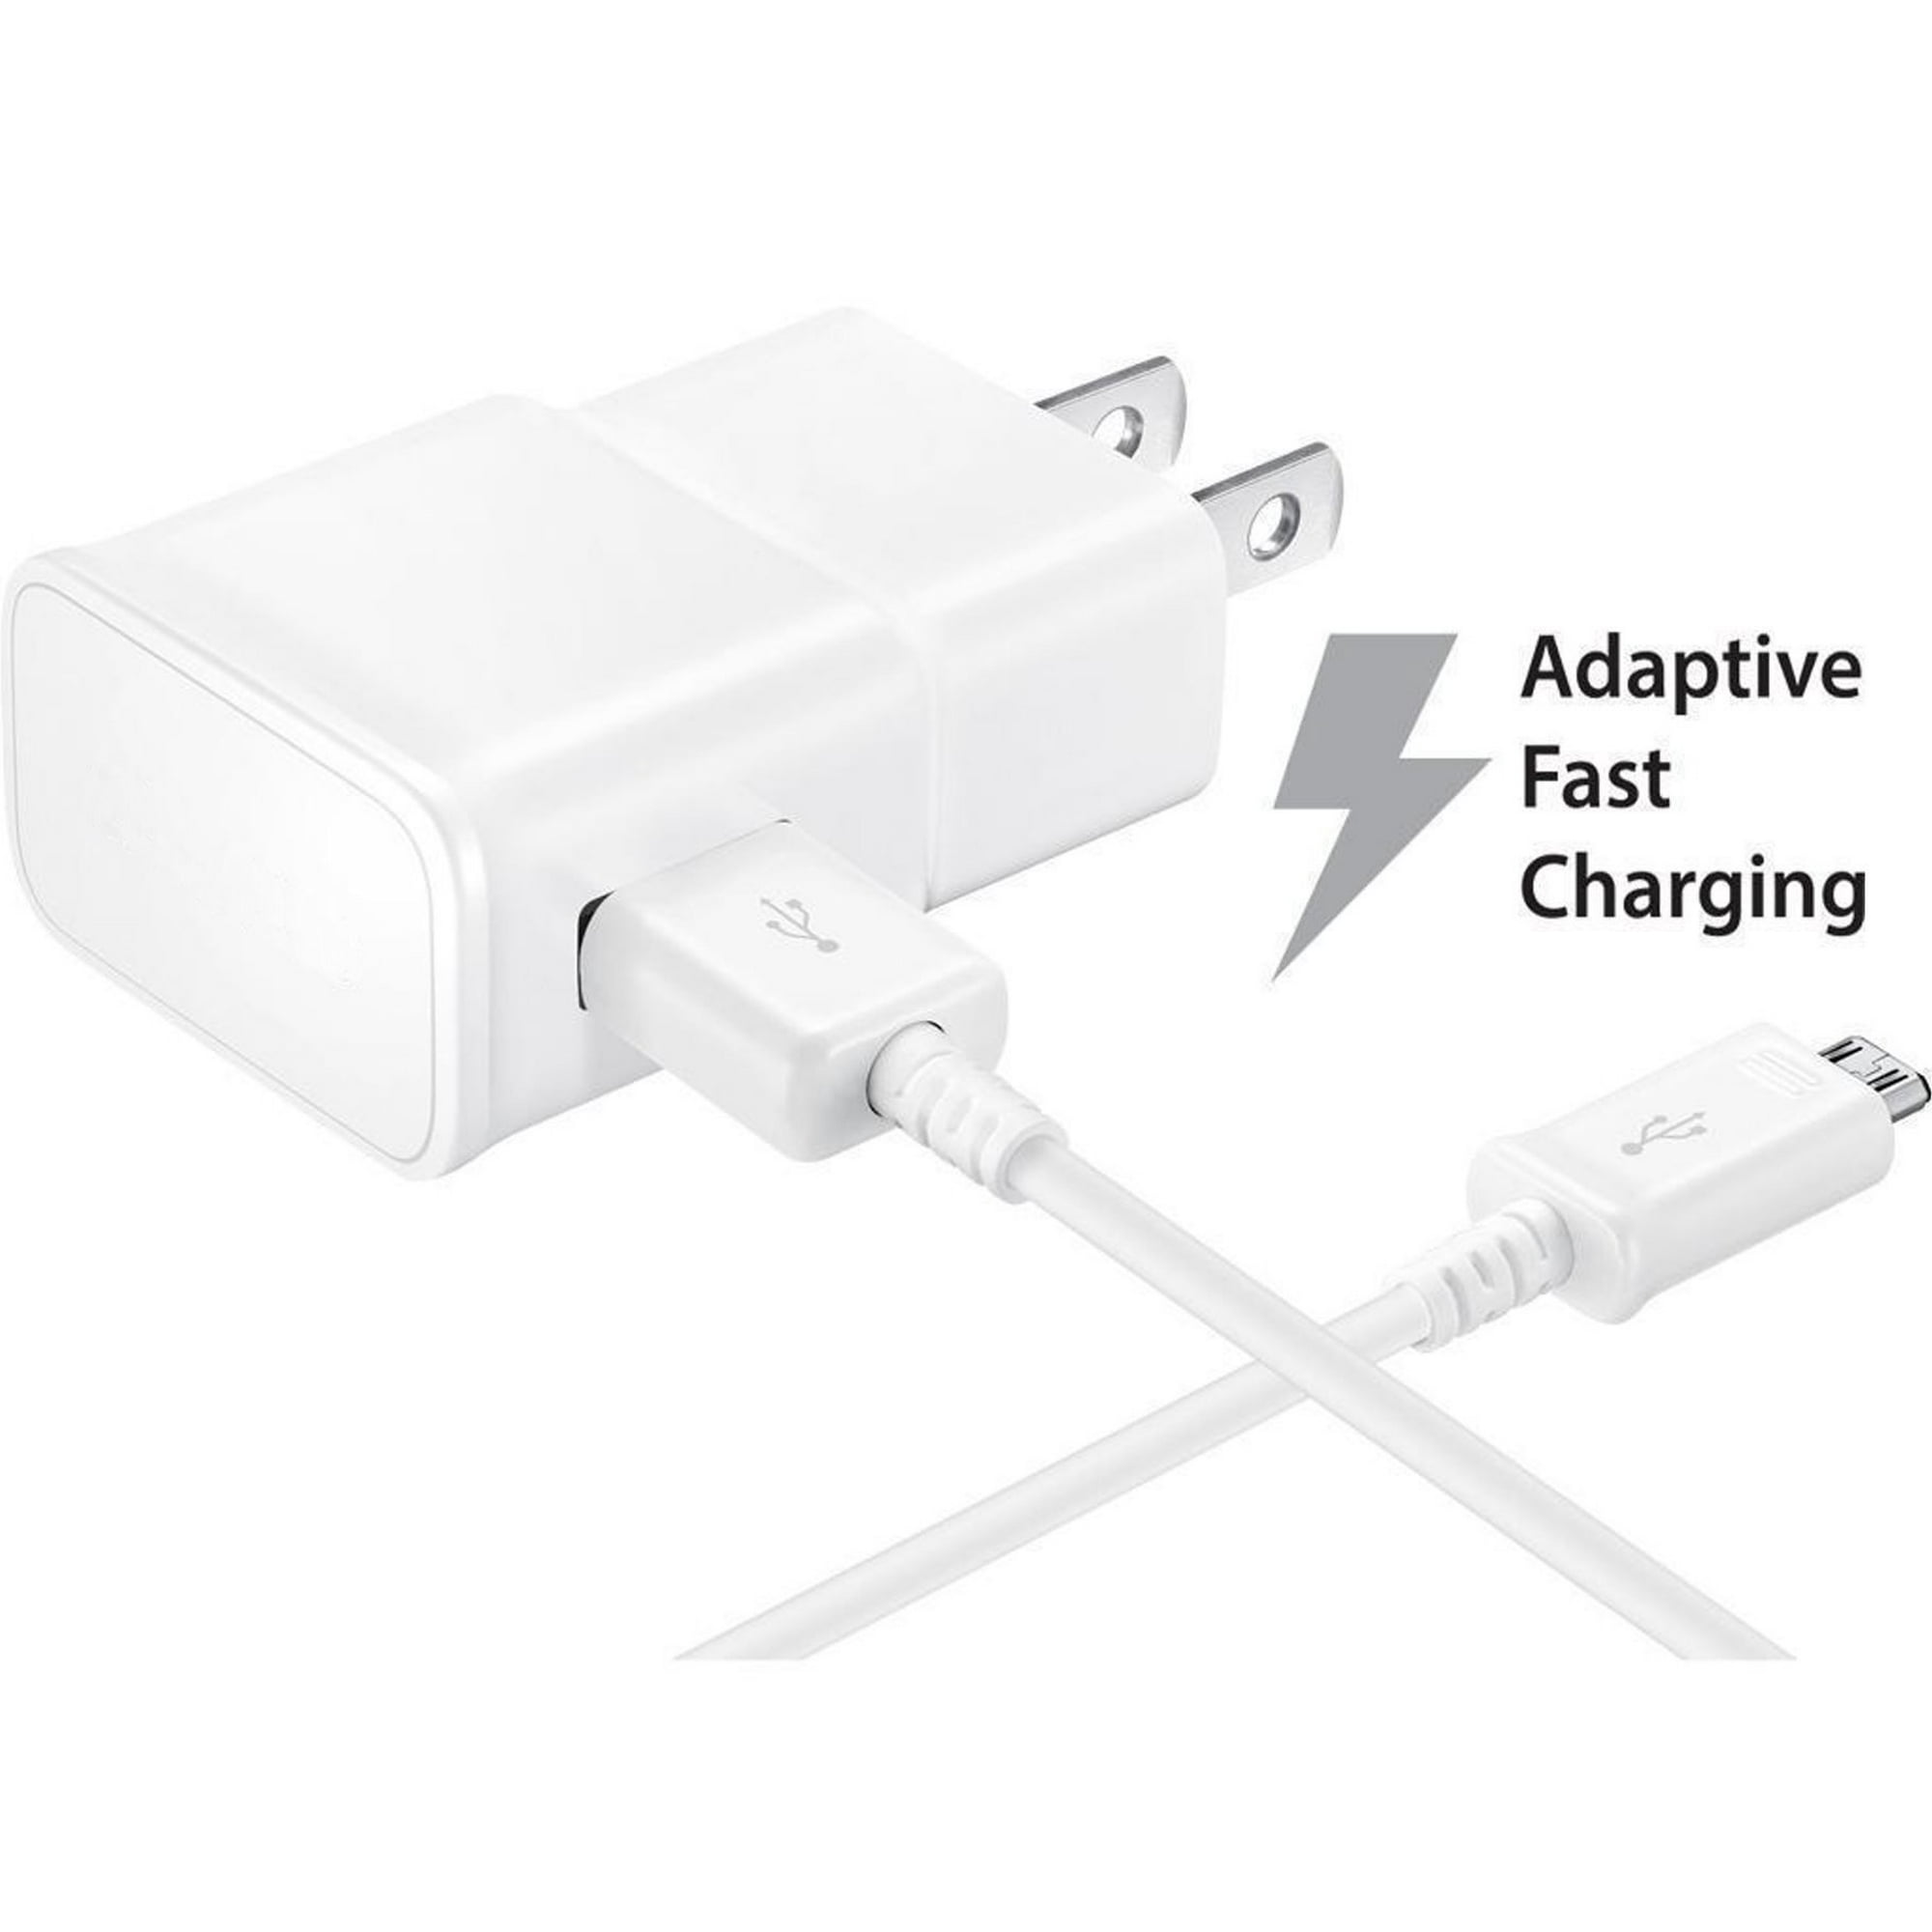 Adaptive Fast Charger Kit Compatible with Huawei P10 Lite Devices-[Wall Charger+5 FT USB Cable]-AFC uses Dual voltages for up to 50% Faster Charging!-White | Walmart Canada